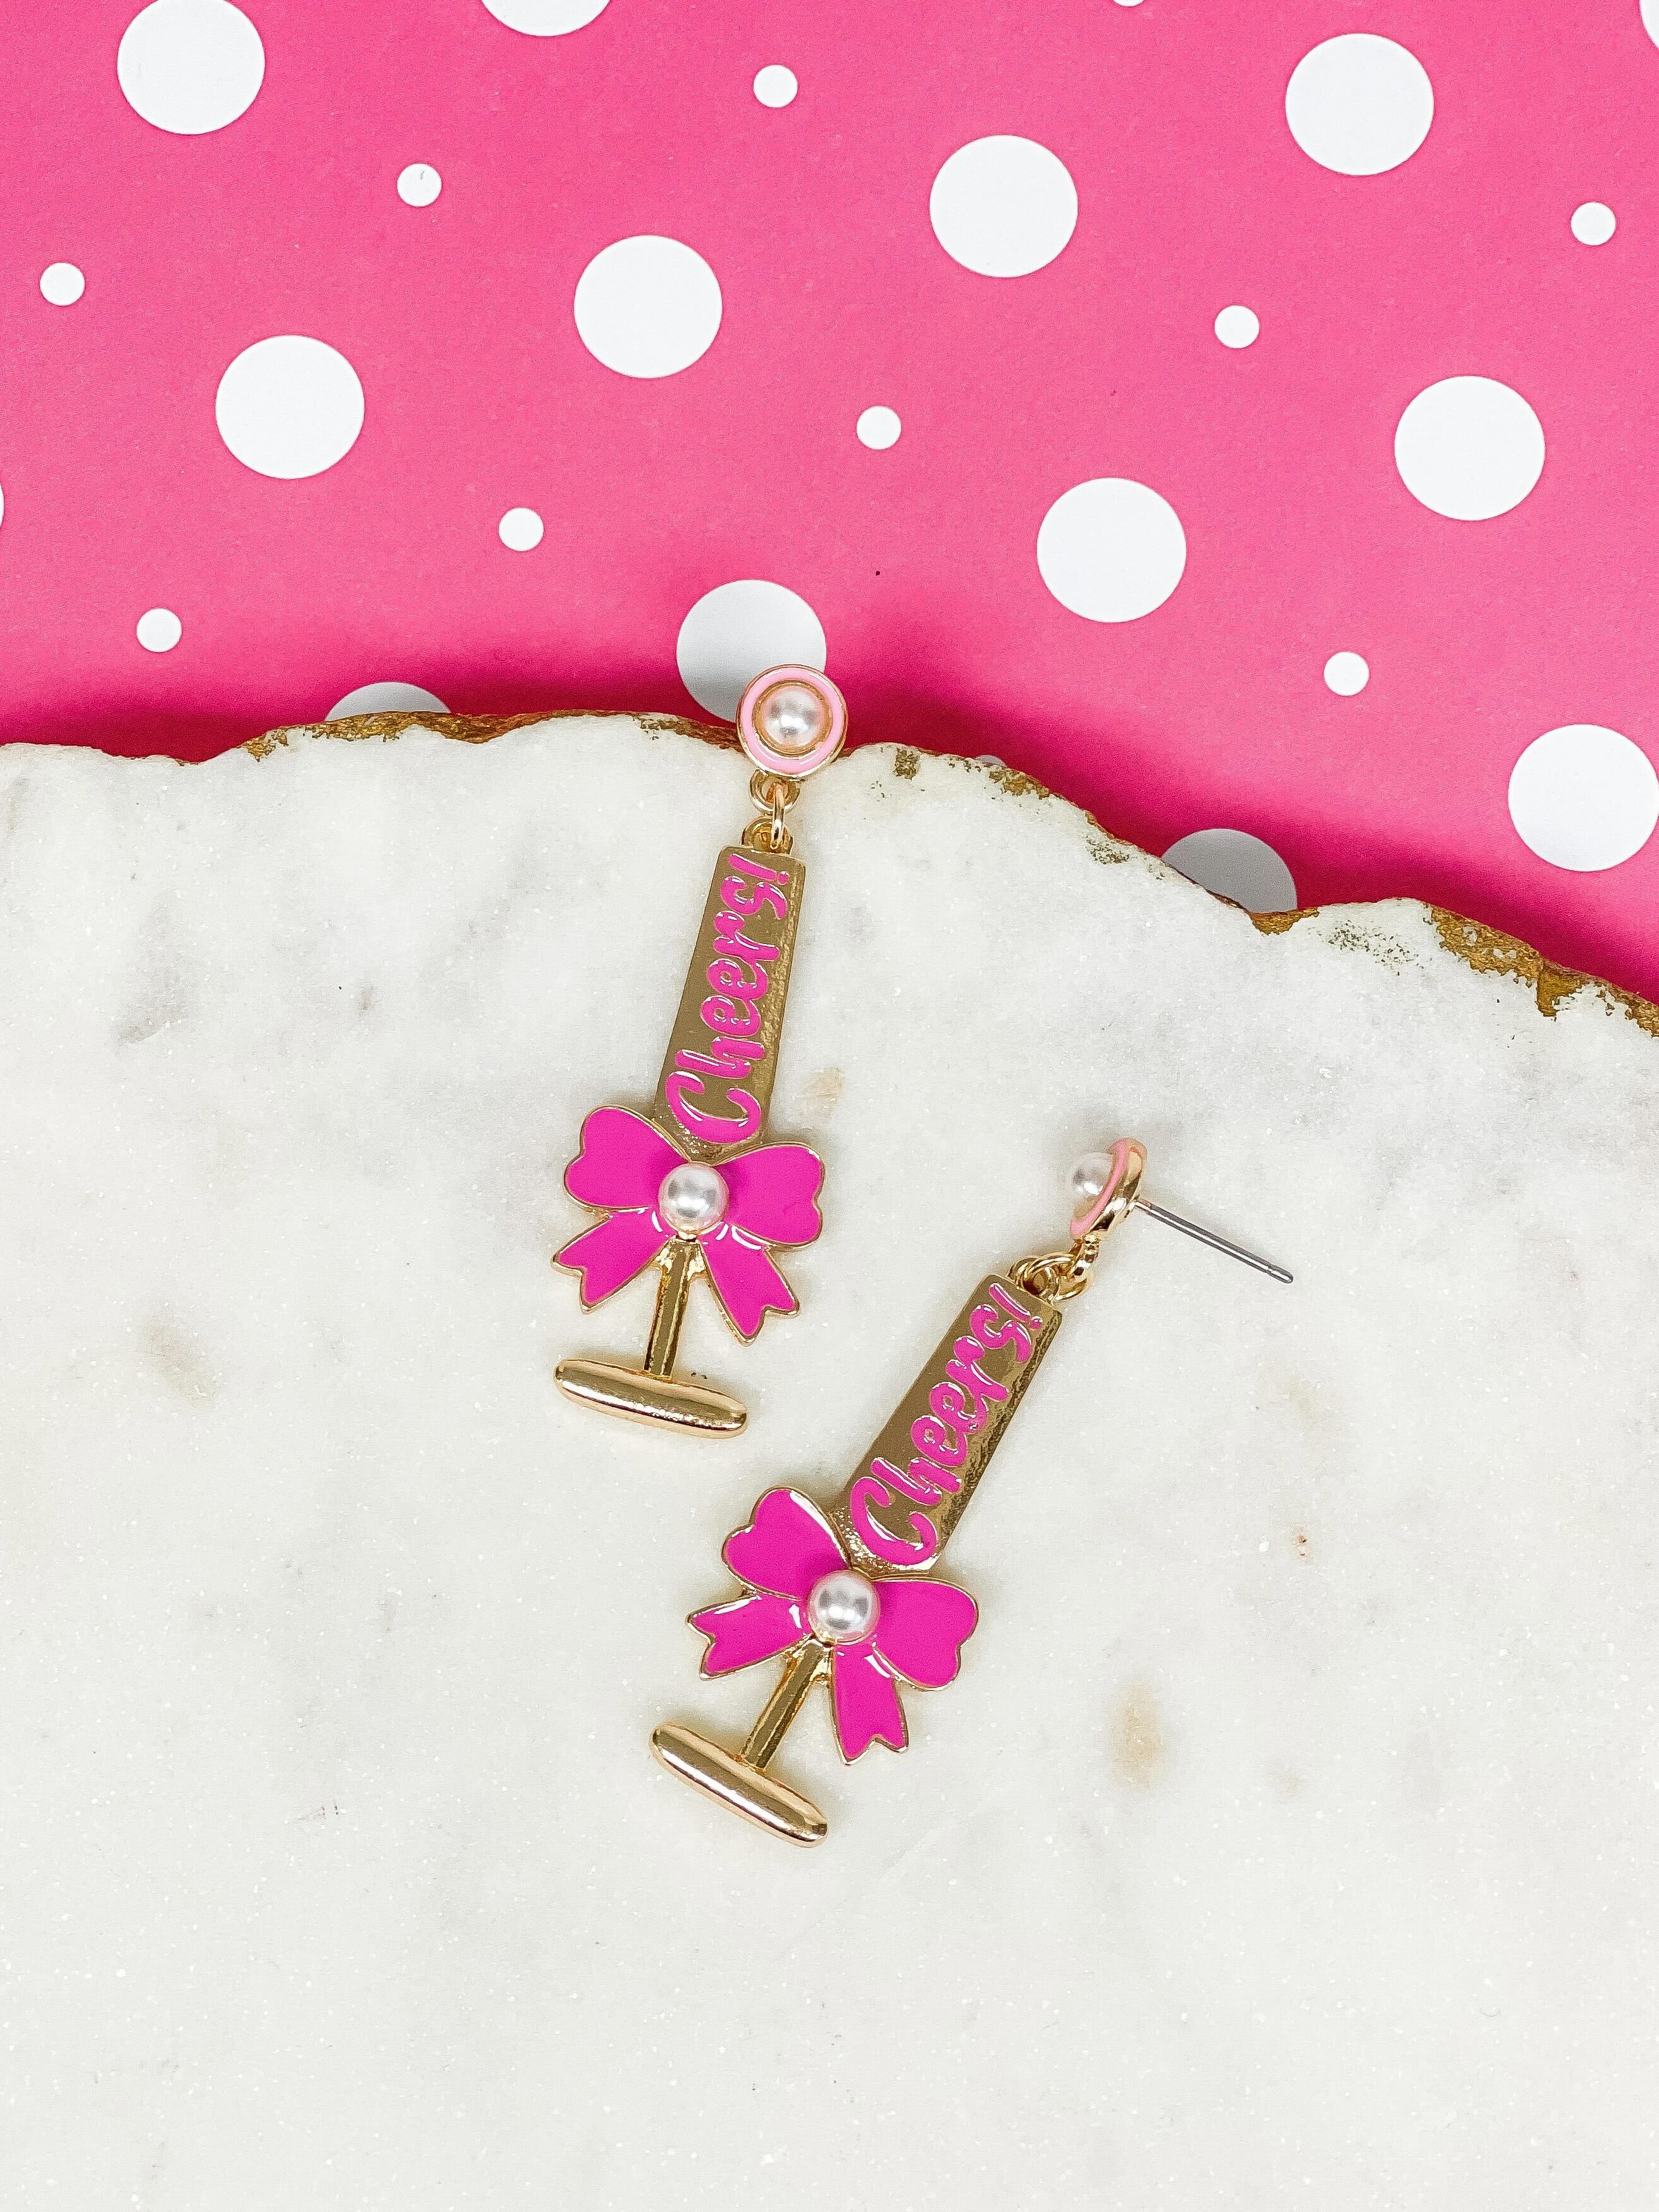 'Cheers!' Pearl Detail Champagne Flute Dangles - Pink